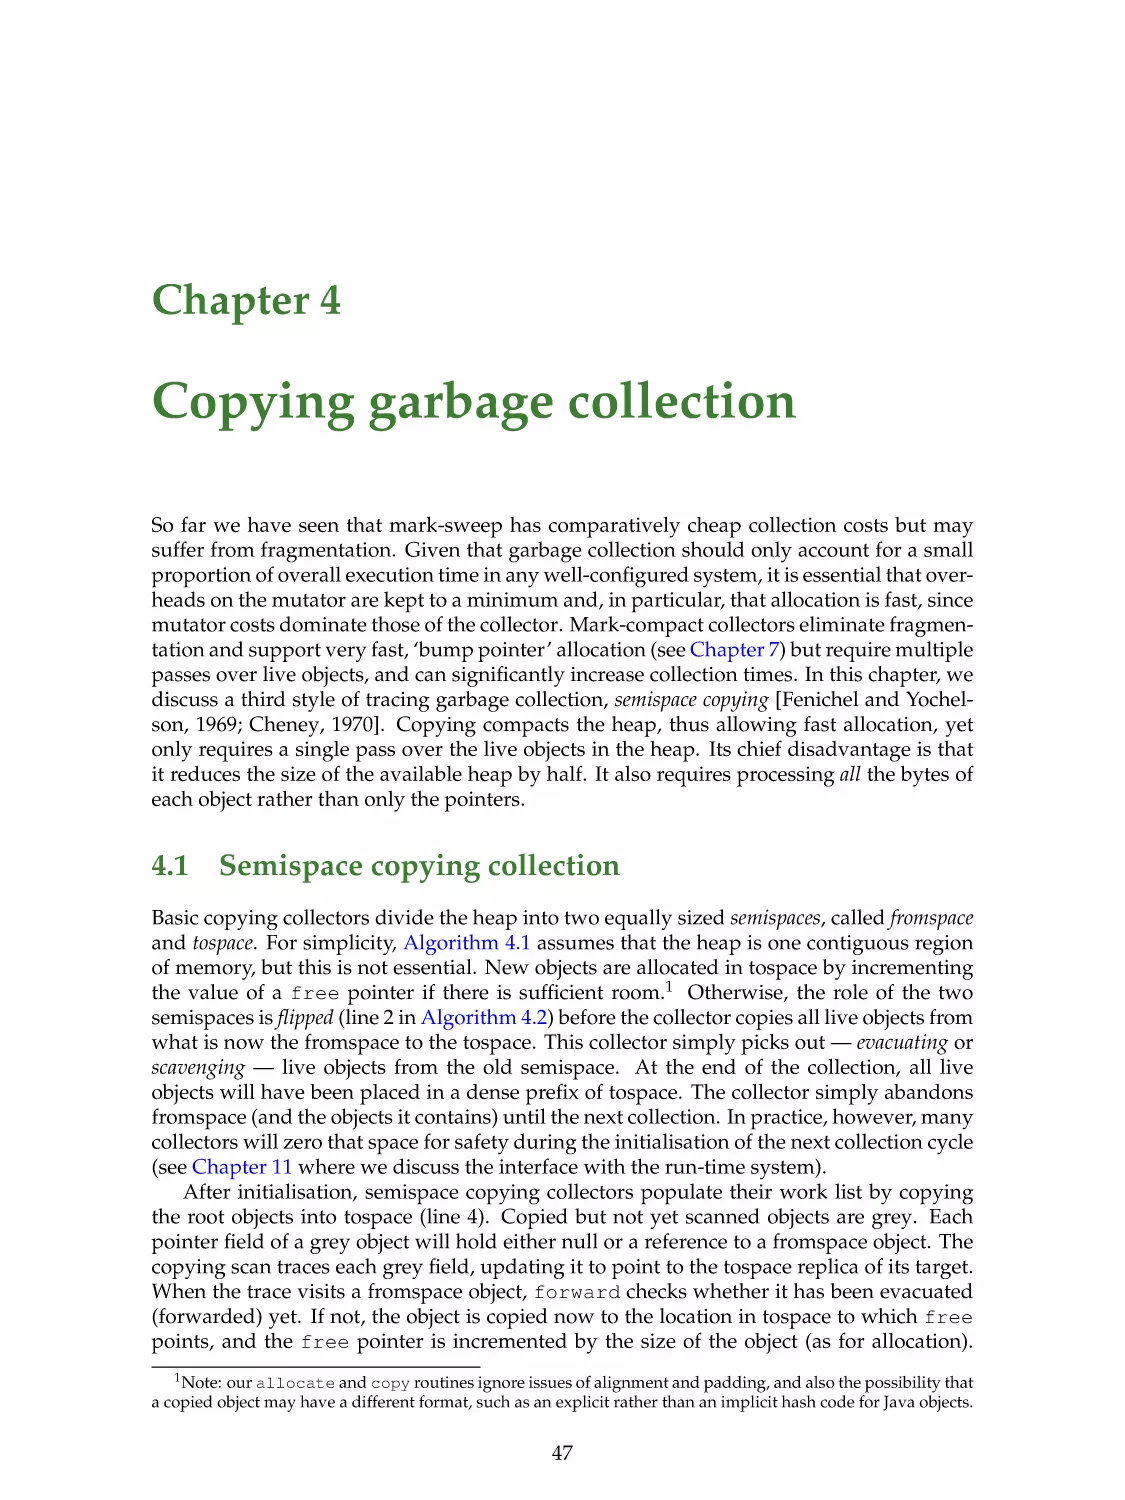 4. Copying garbage collection
4.1. Semispace copying collection